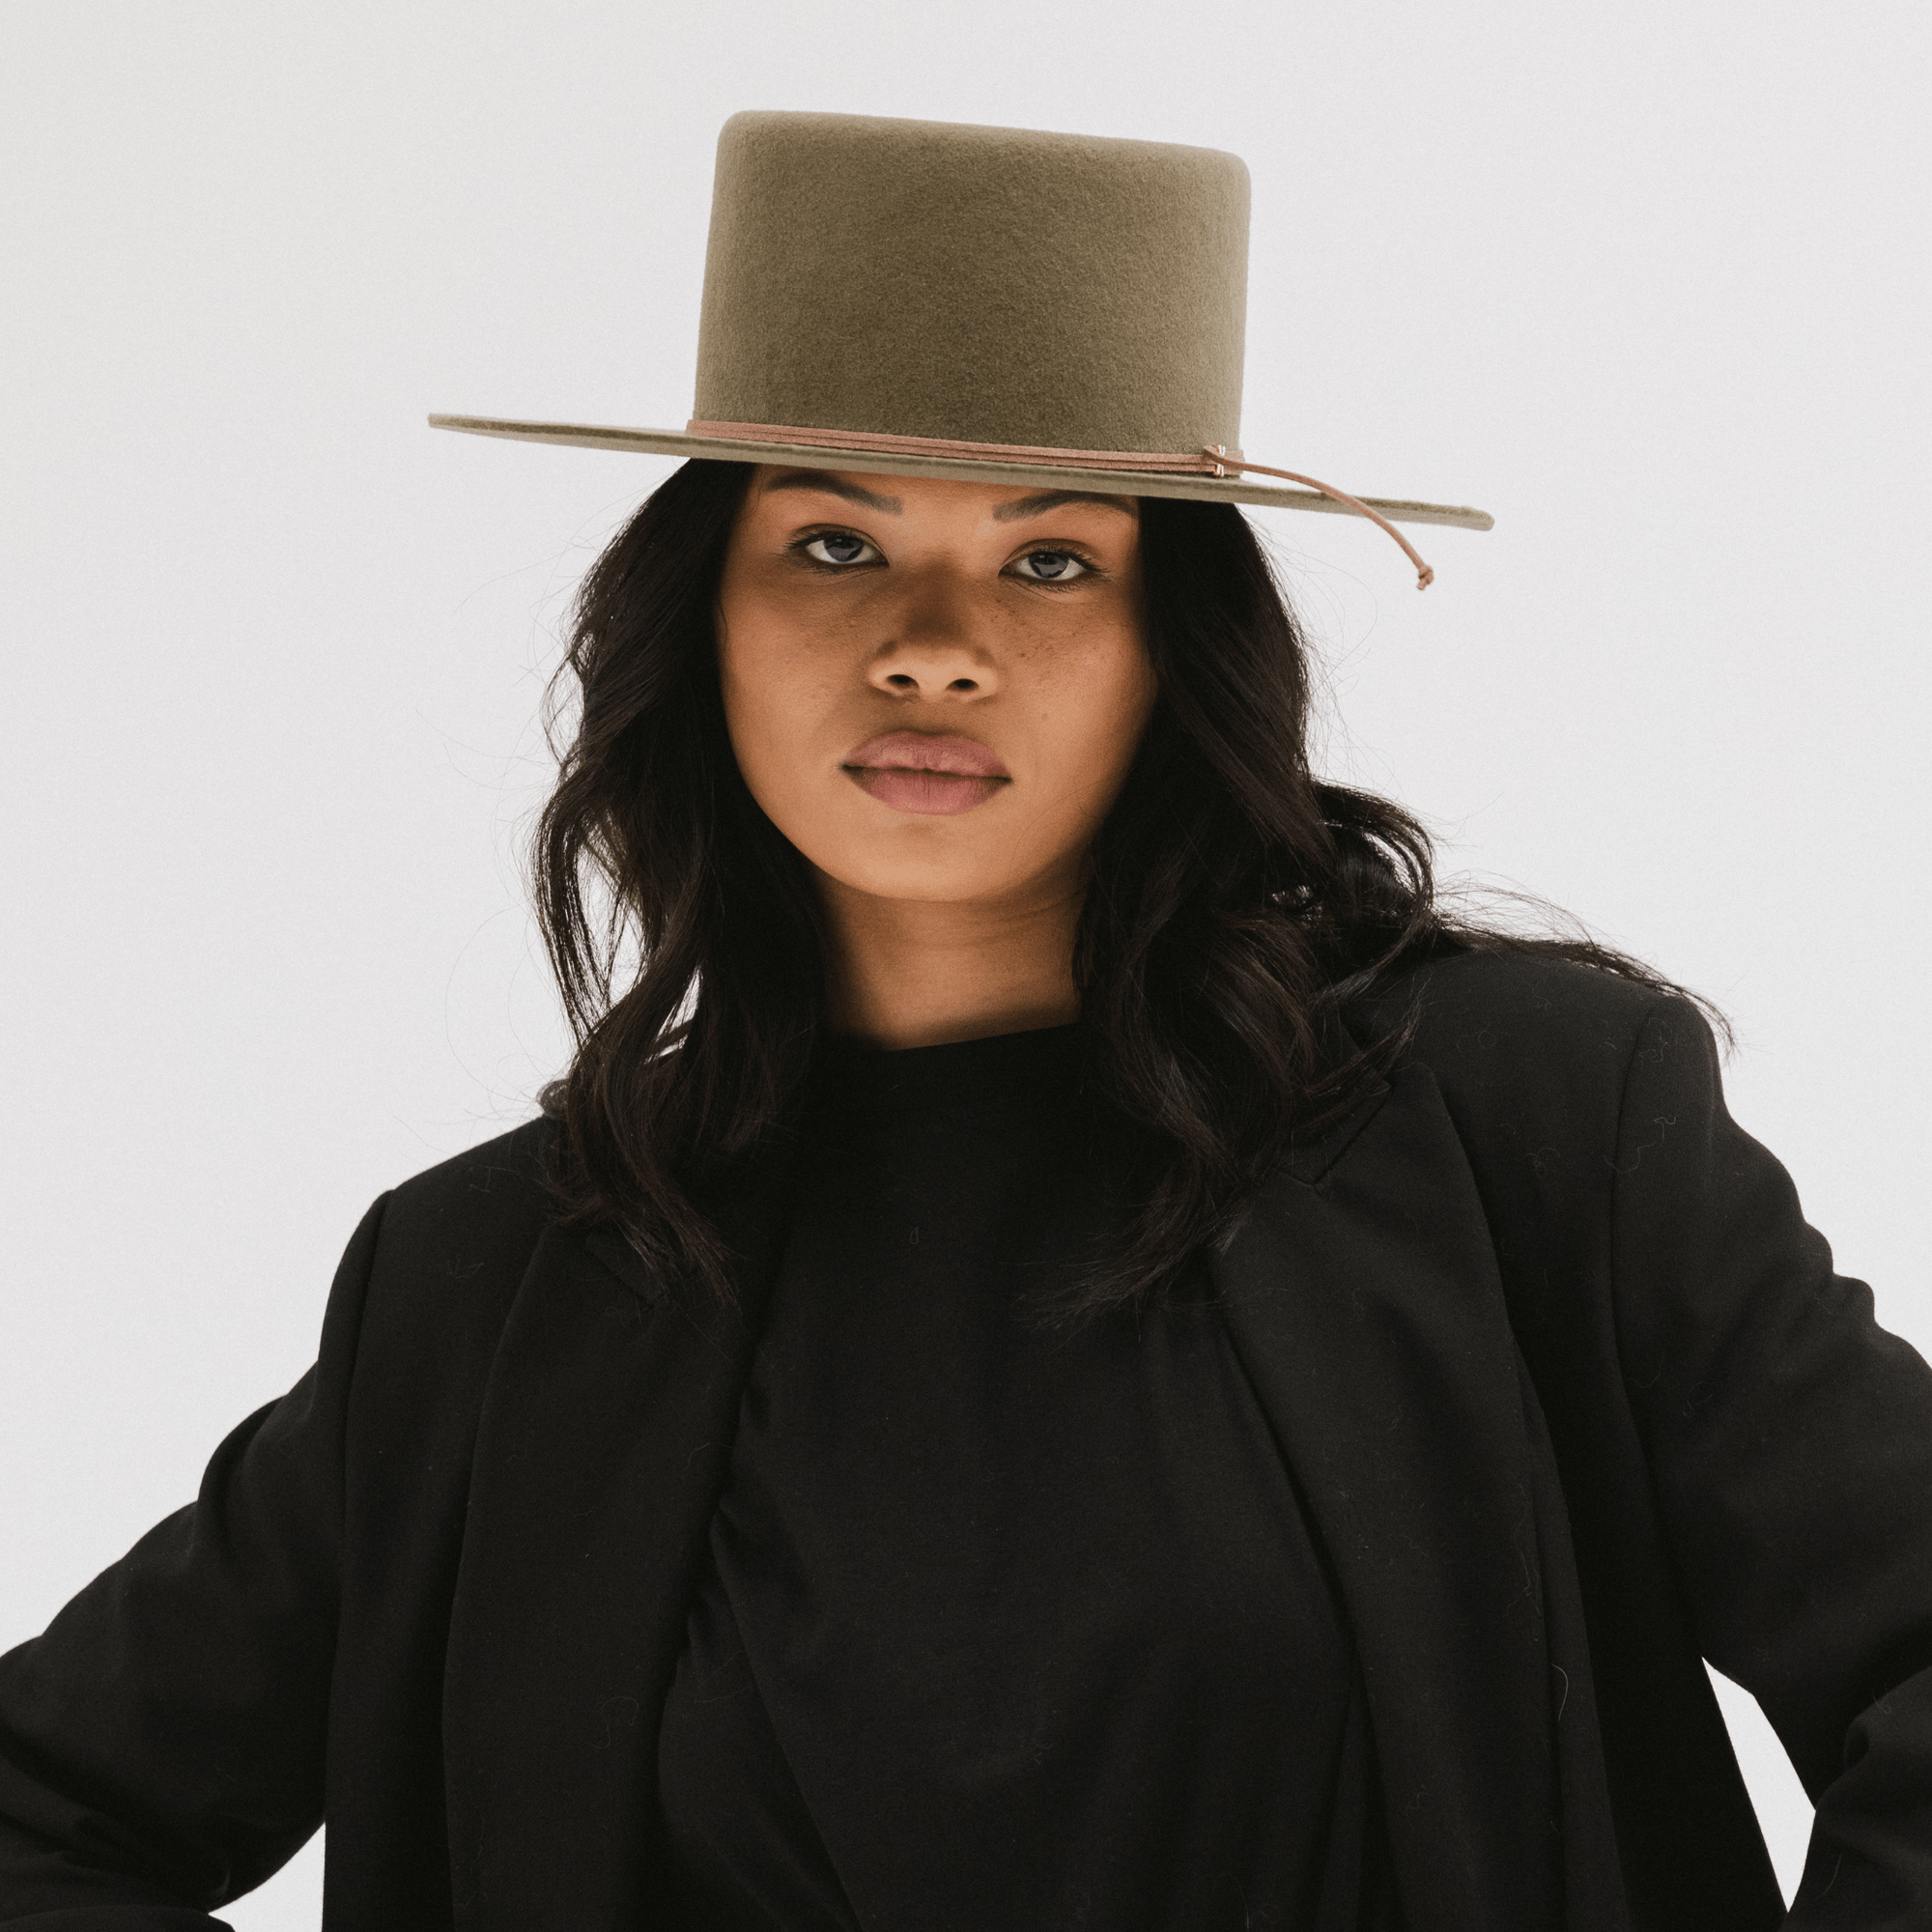 Gigi Pip felt hats for women - Maise Telescope Crown - 100% australian wool medium flat brim with a telescope crown, featuring an adjustable, layered leather band with our siganture xx detailing the band [cream]